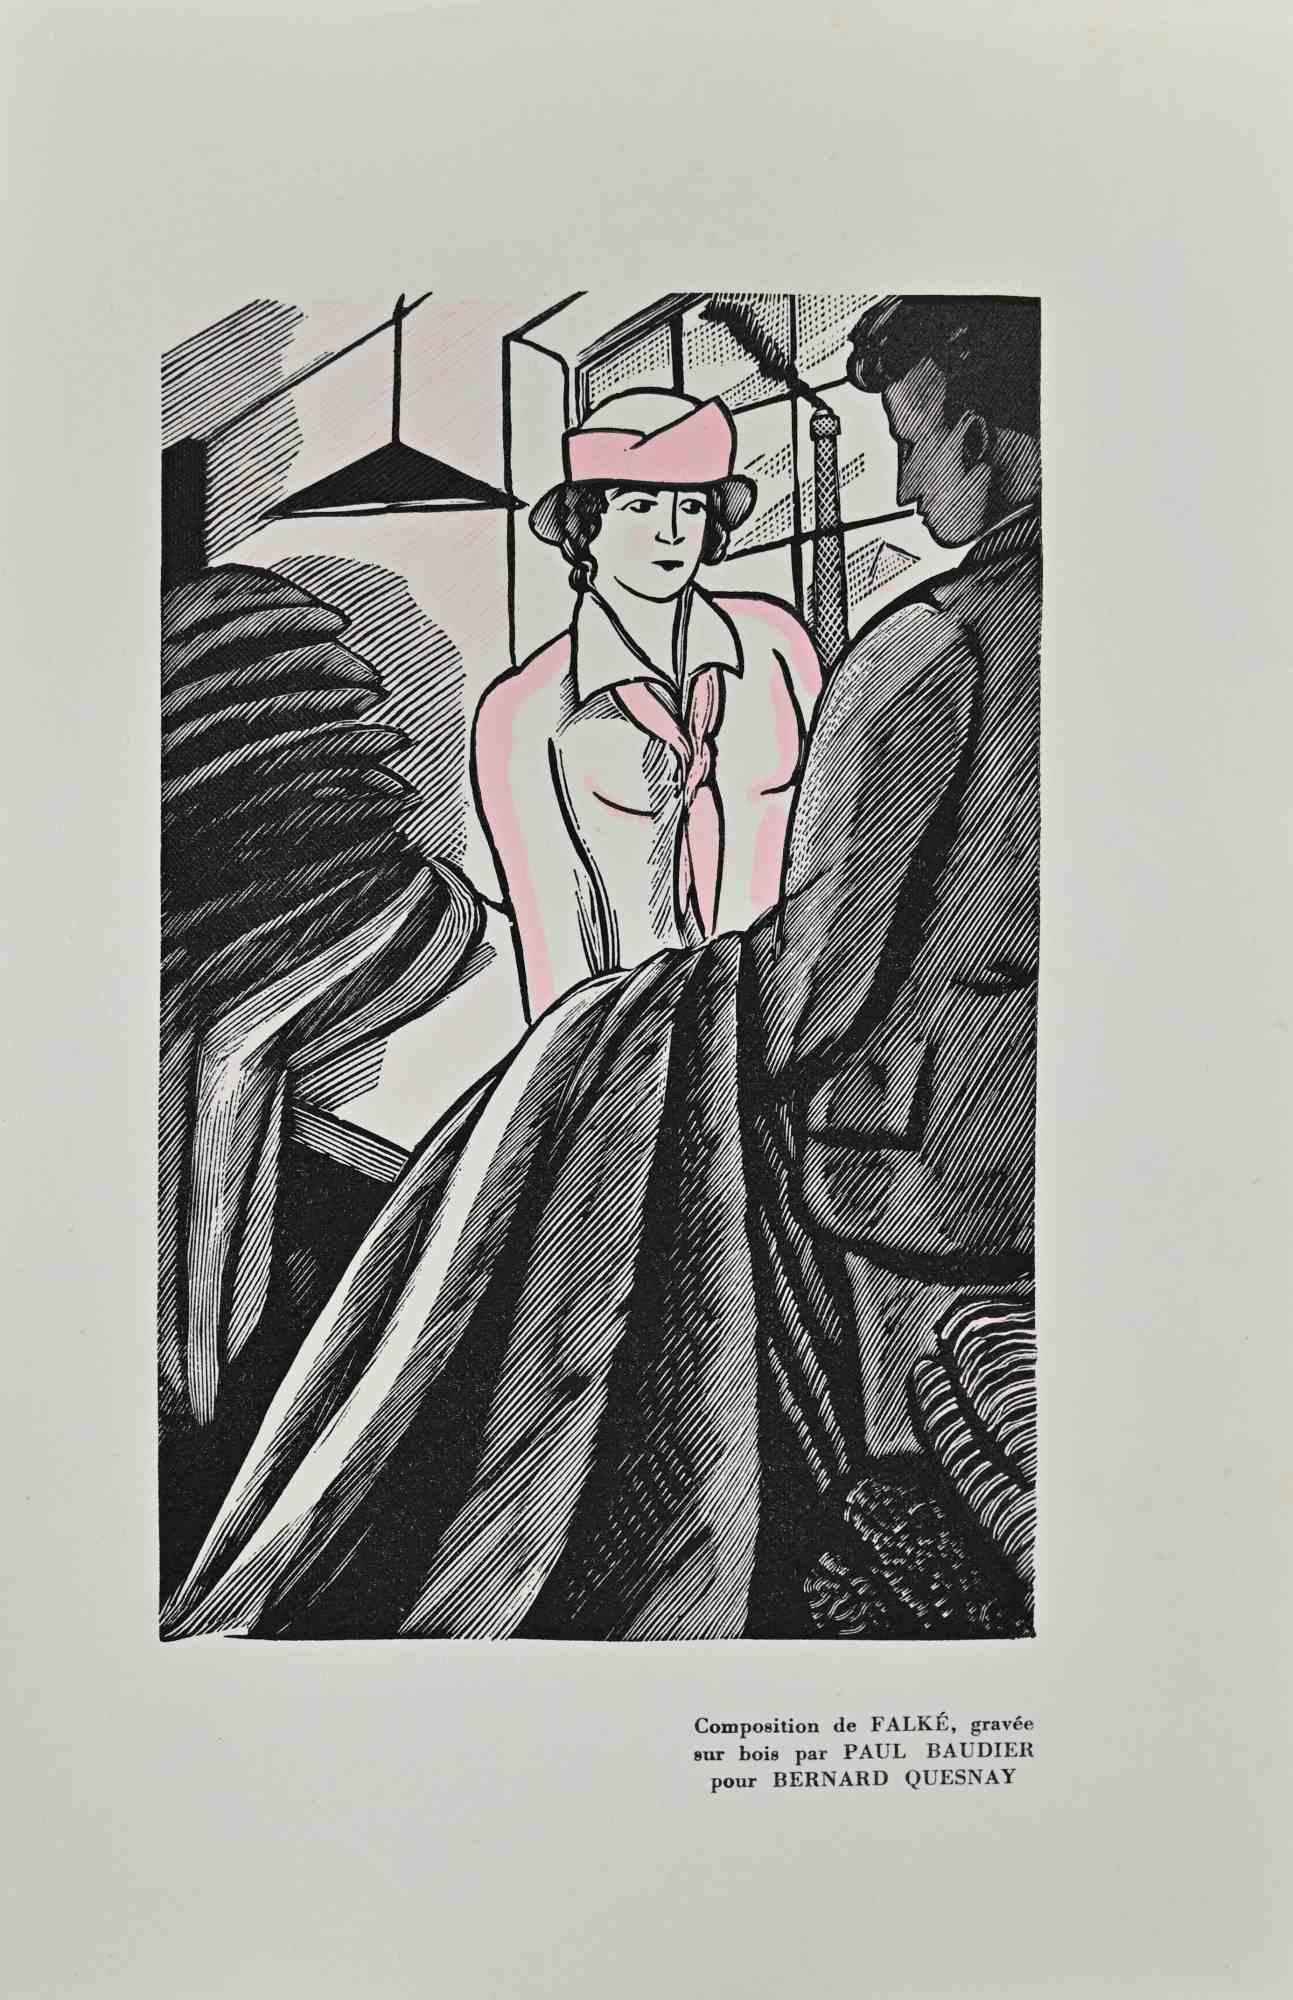 Rendezvous is an original woodcut print on ivory-colored paper realized by Paul Baudier (1881-1962) in the 1930s.

On the lower right description in French.

Very good conditions.

Paul Baudier, (born October 18, 1881 in Paris and died December 9,